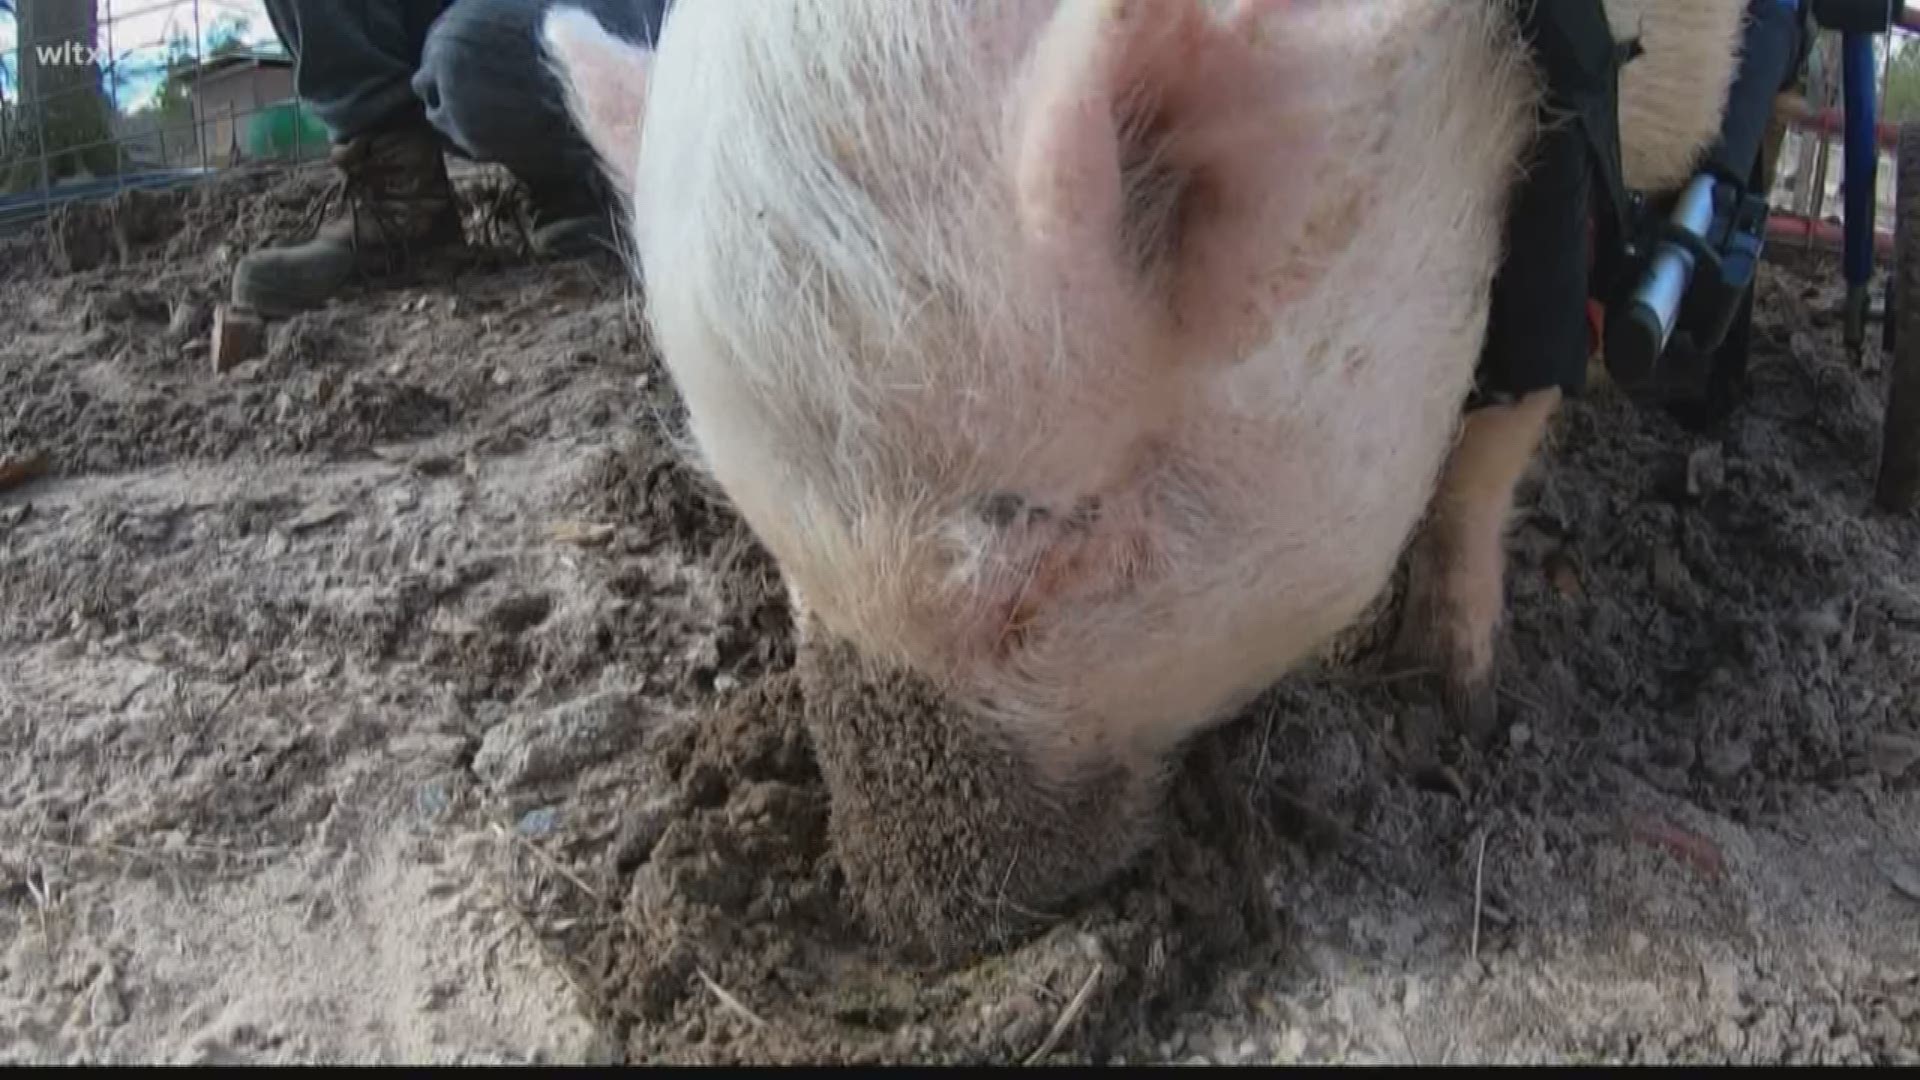 An animal sanctuary in Leesville needs help socializing their pigs, and you can make a difference by stopping by to cuddle with them.